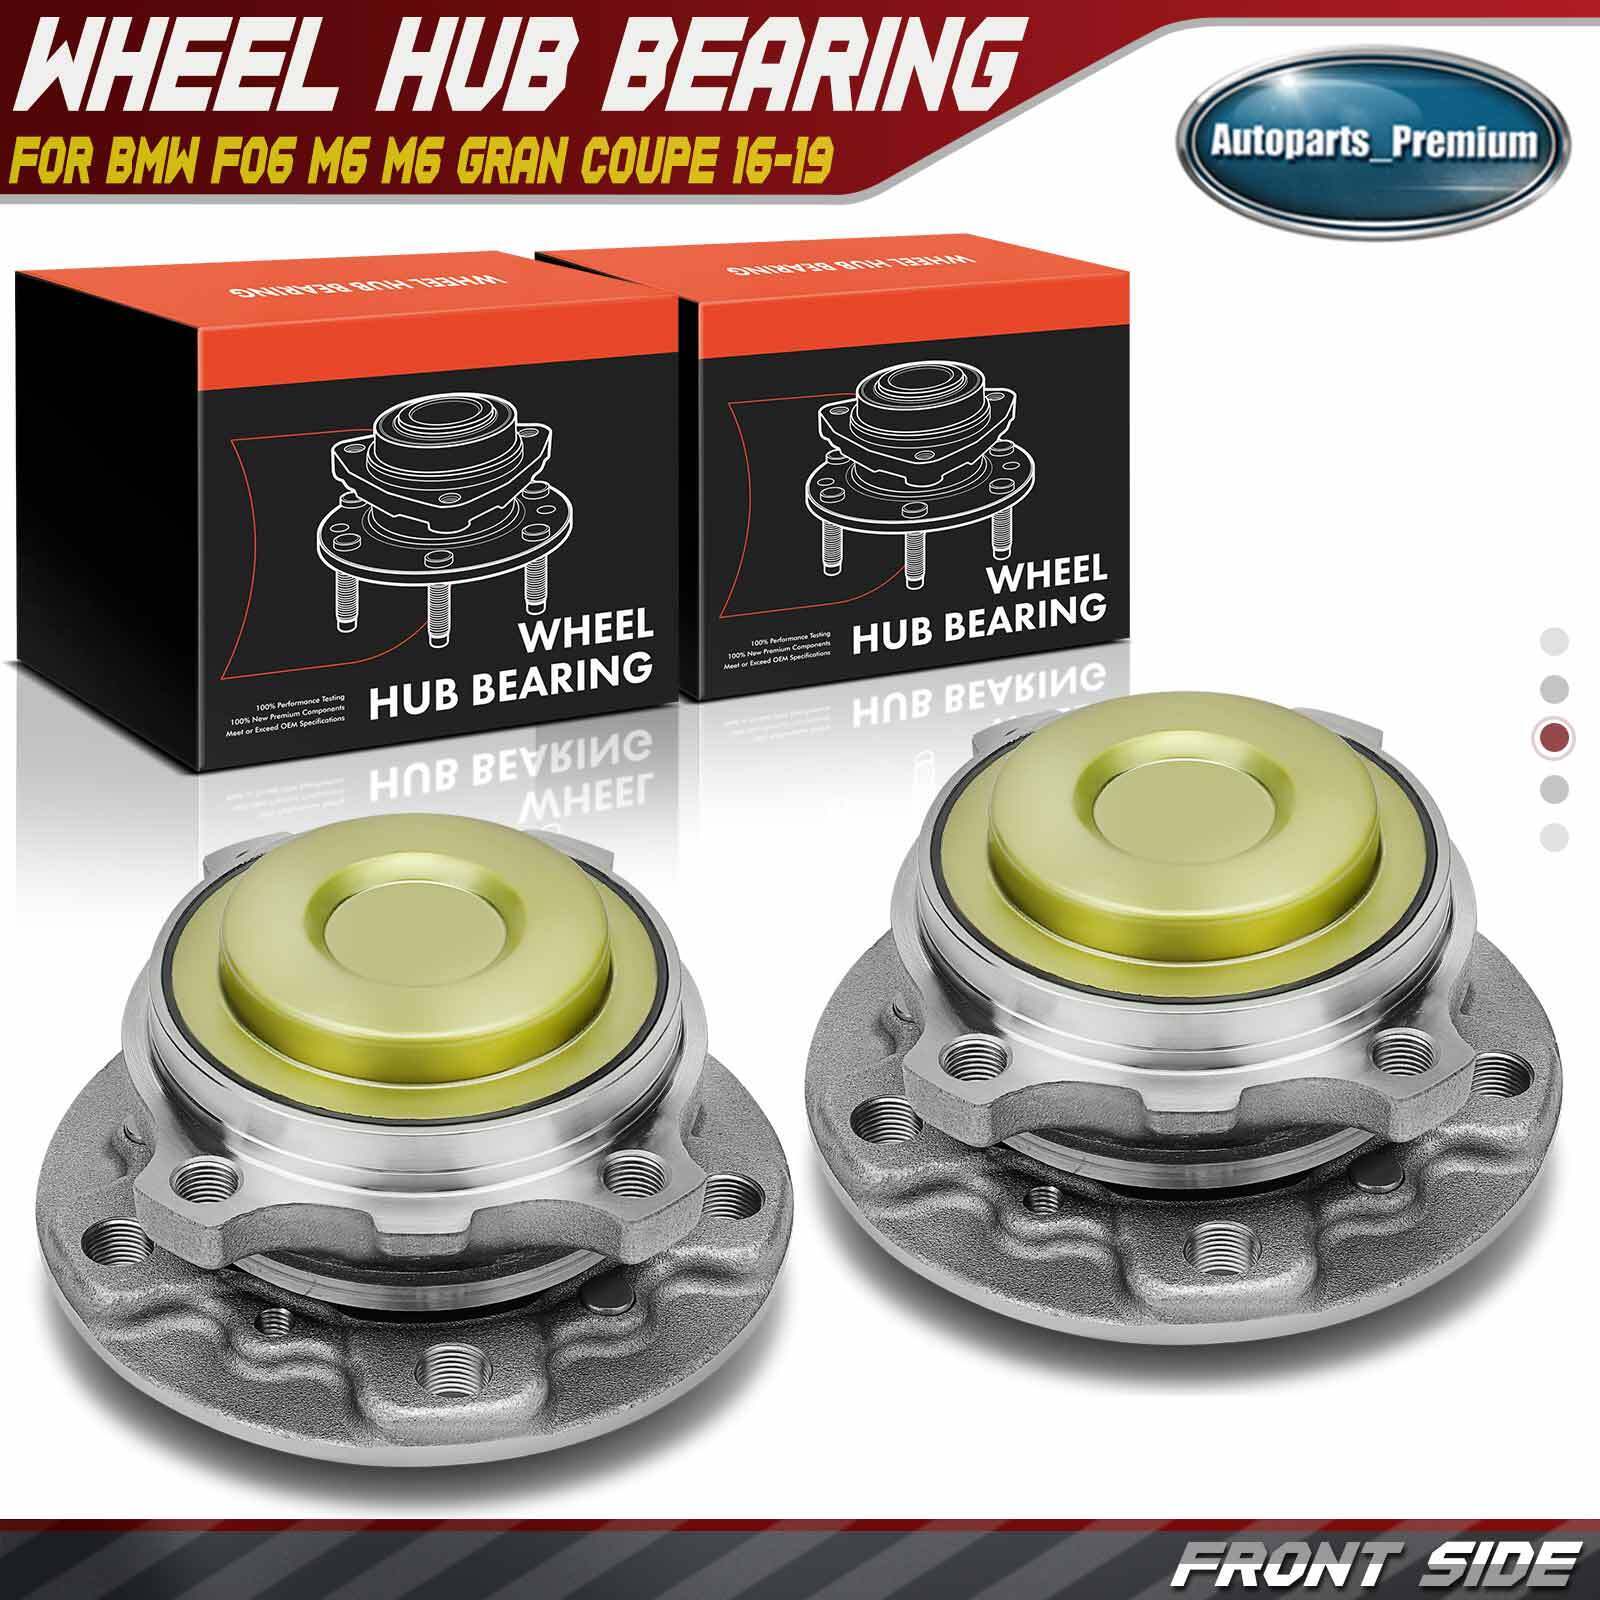 2x Front LH & RH Wheel Hub Bearing Assembly for BMW F06 M6 M6 Gran Coupe 16-19